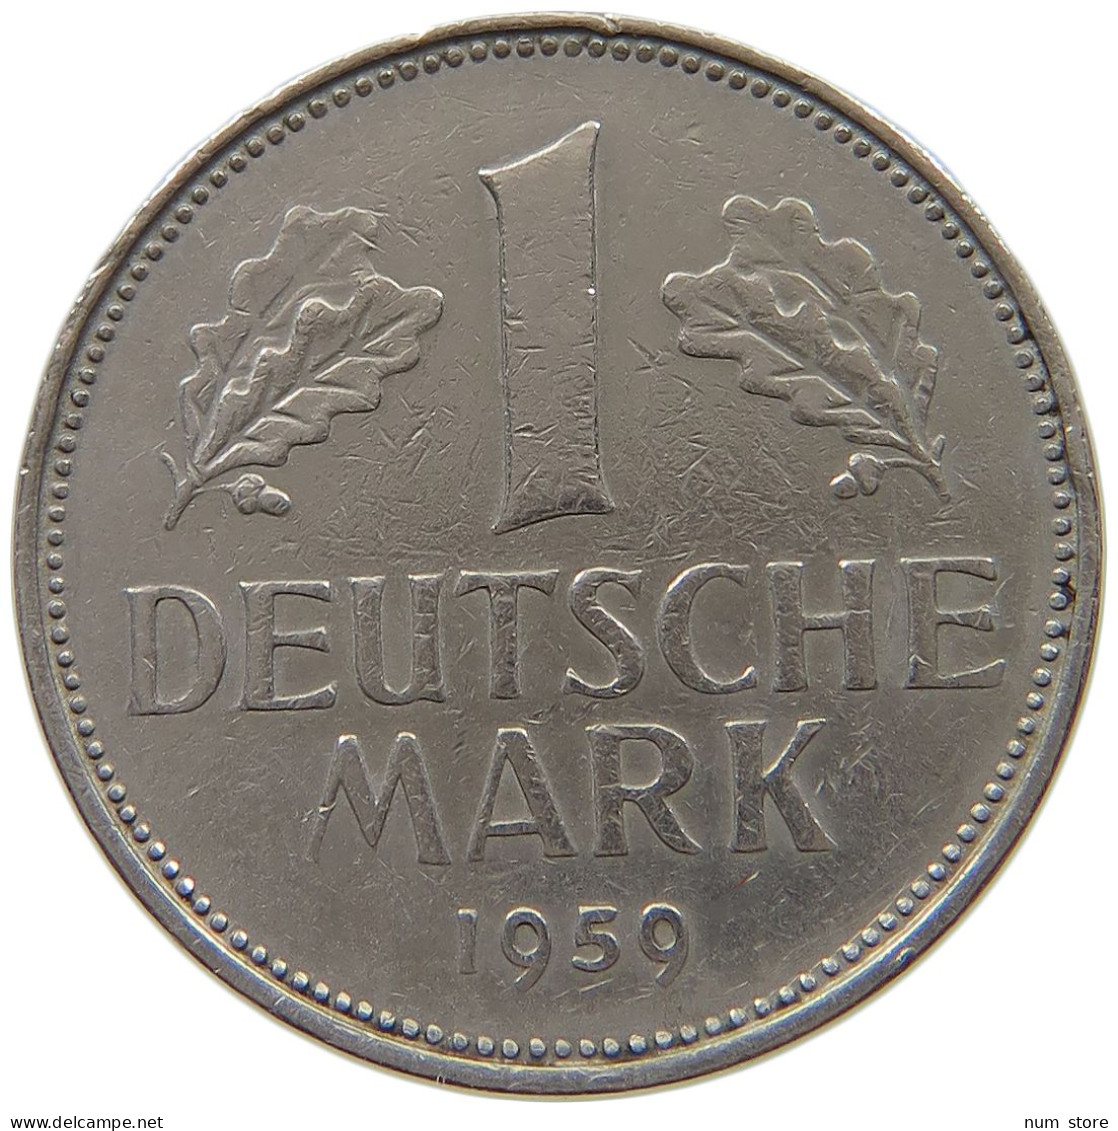 GERMANY WEST 1 MARK 1959 D #a072 0251 - 1 Mark